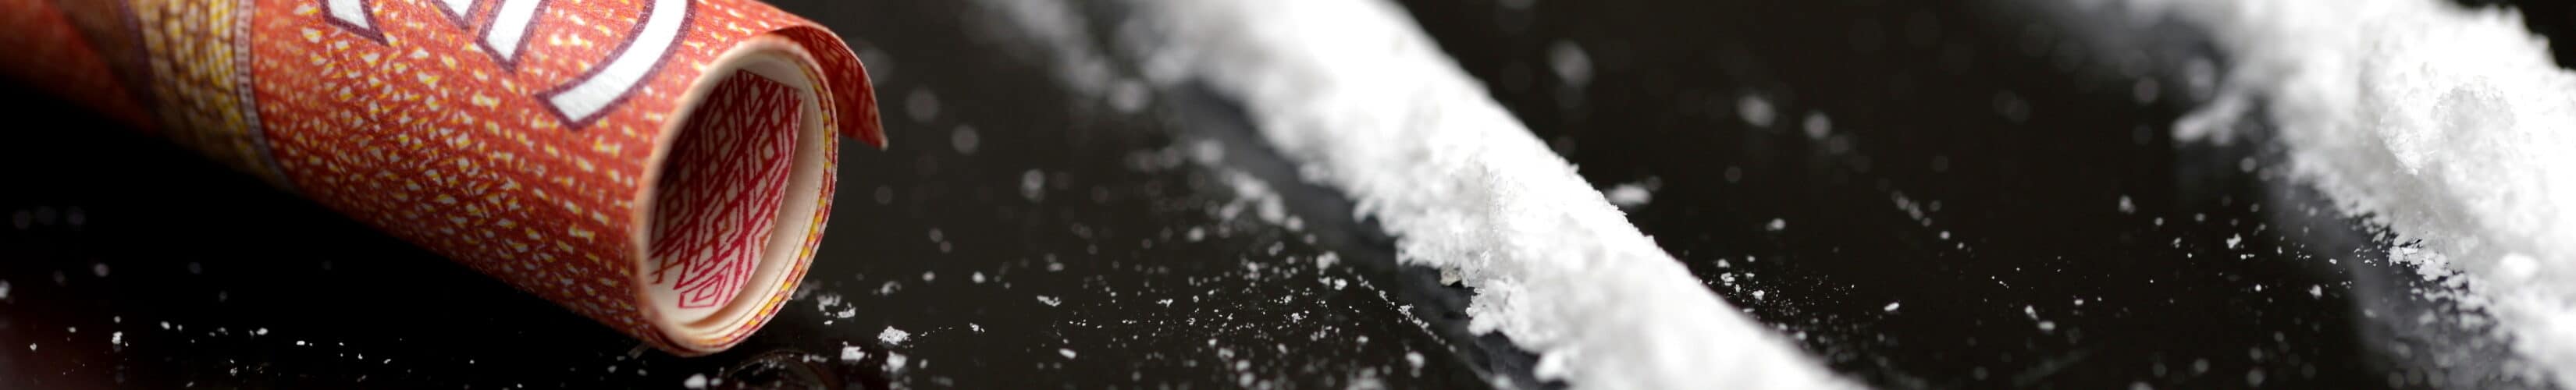 World Drug Report: Cocaine On The Rise